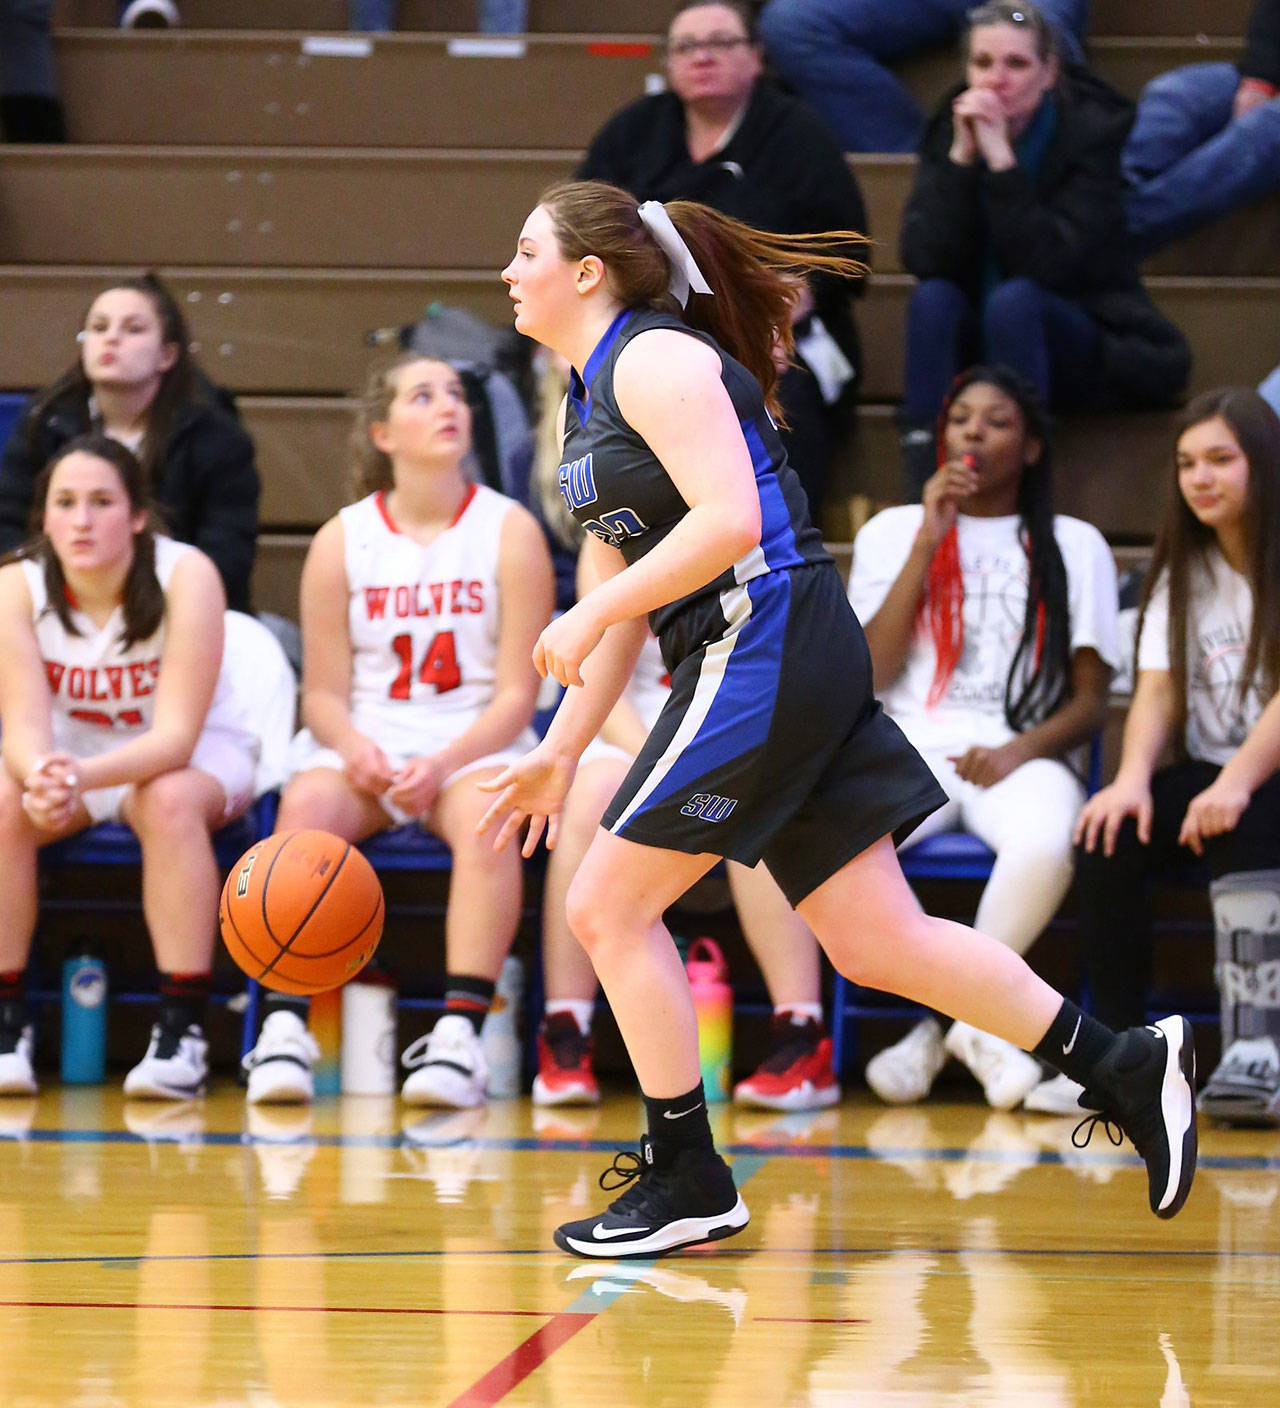 Point guard Kayla Knauer advances the ball in Friday’s game.(Photo by John Fisken)